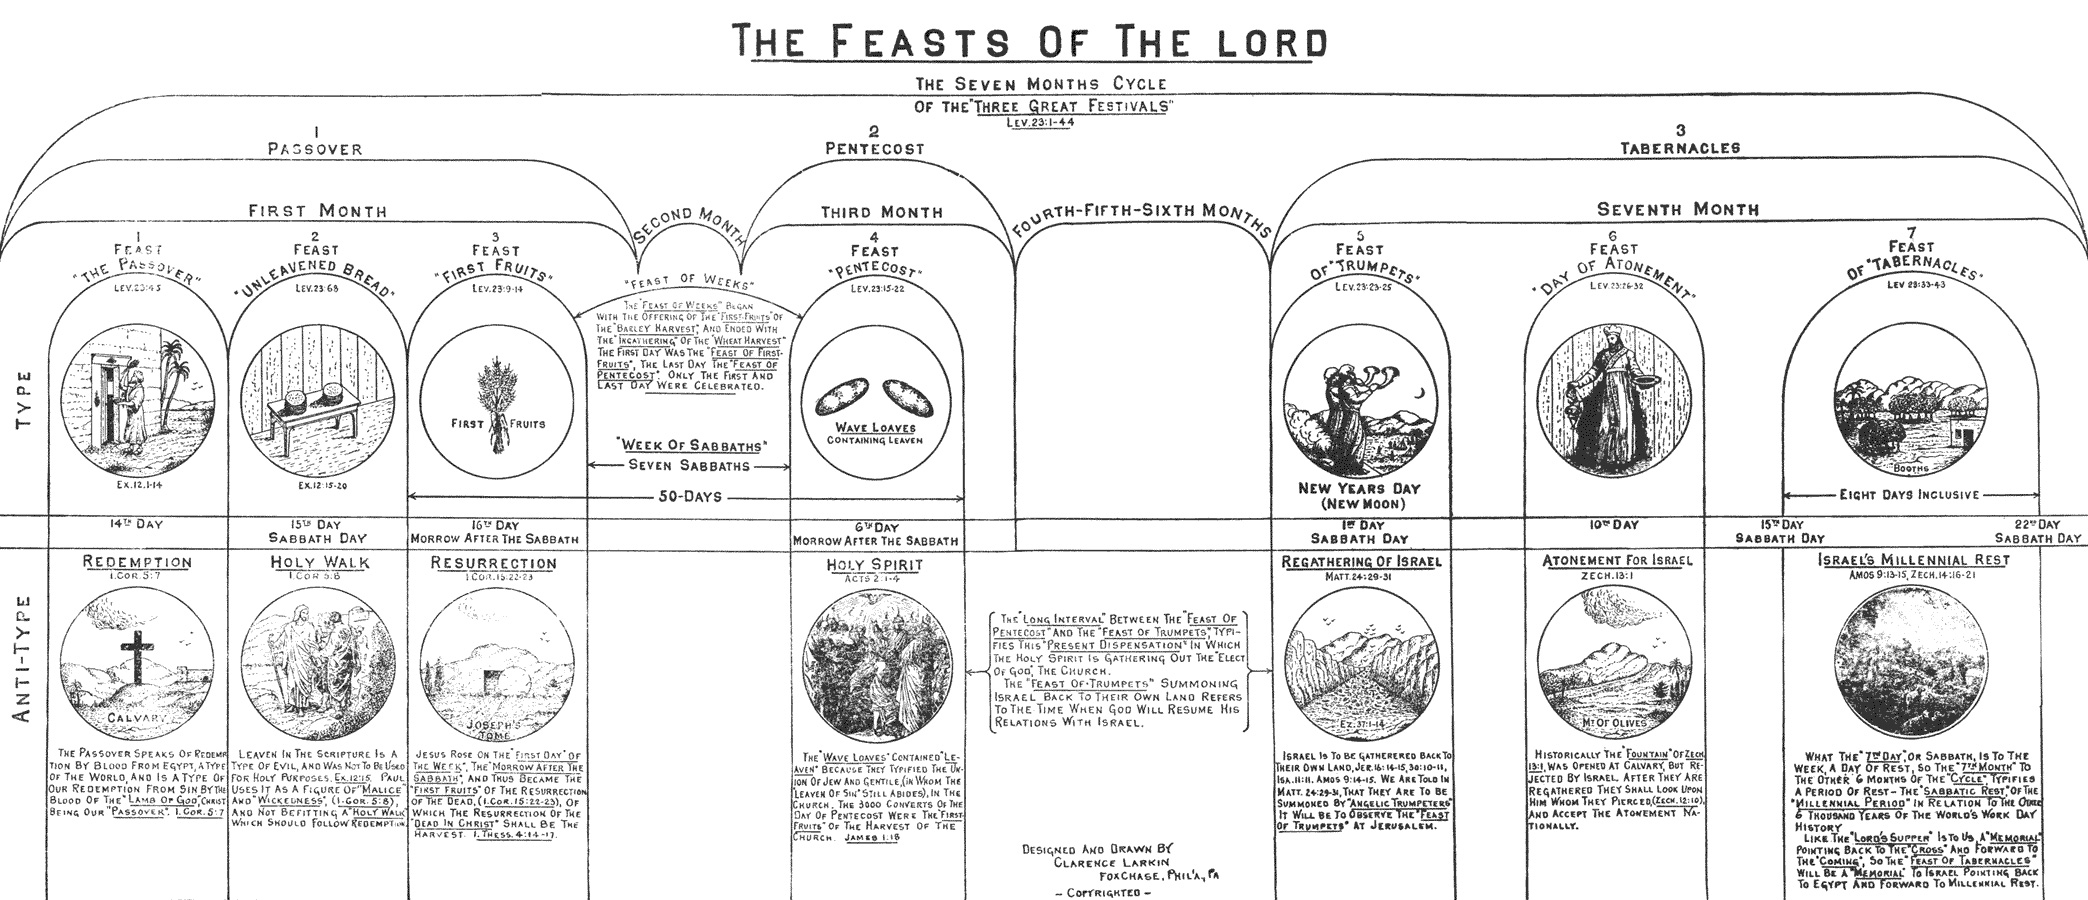 The Feasts of the Lord Illustration by Clarence Larkin